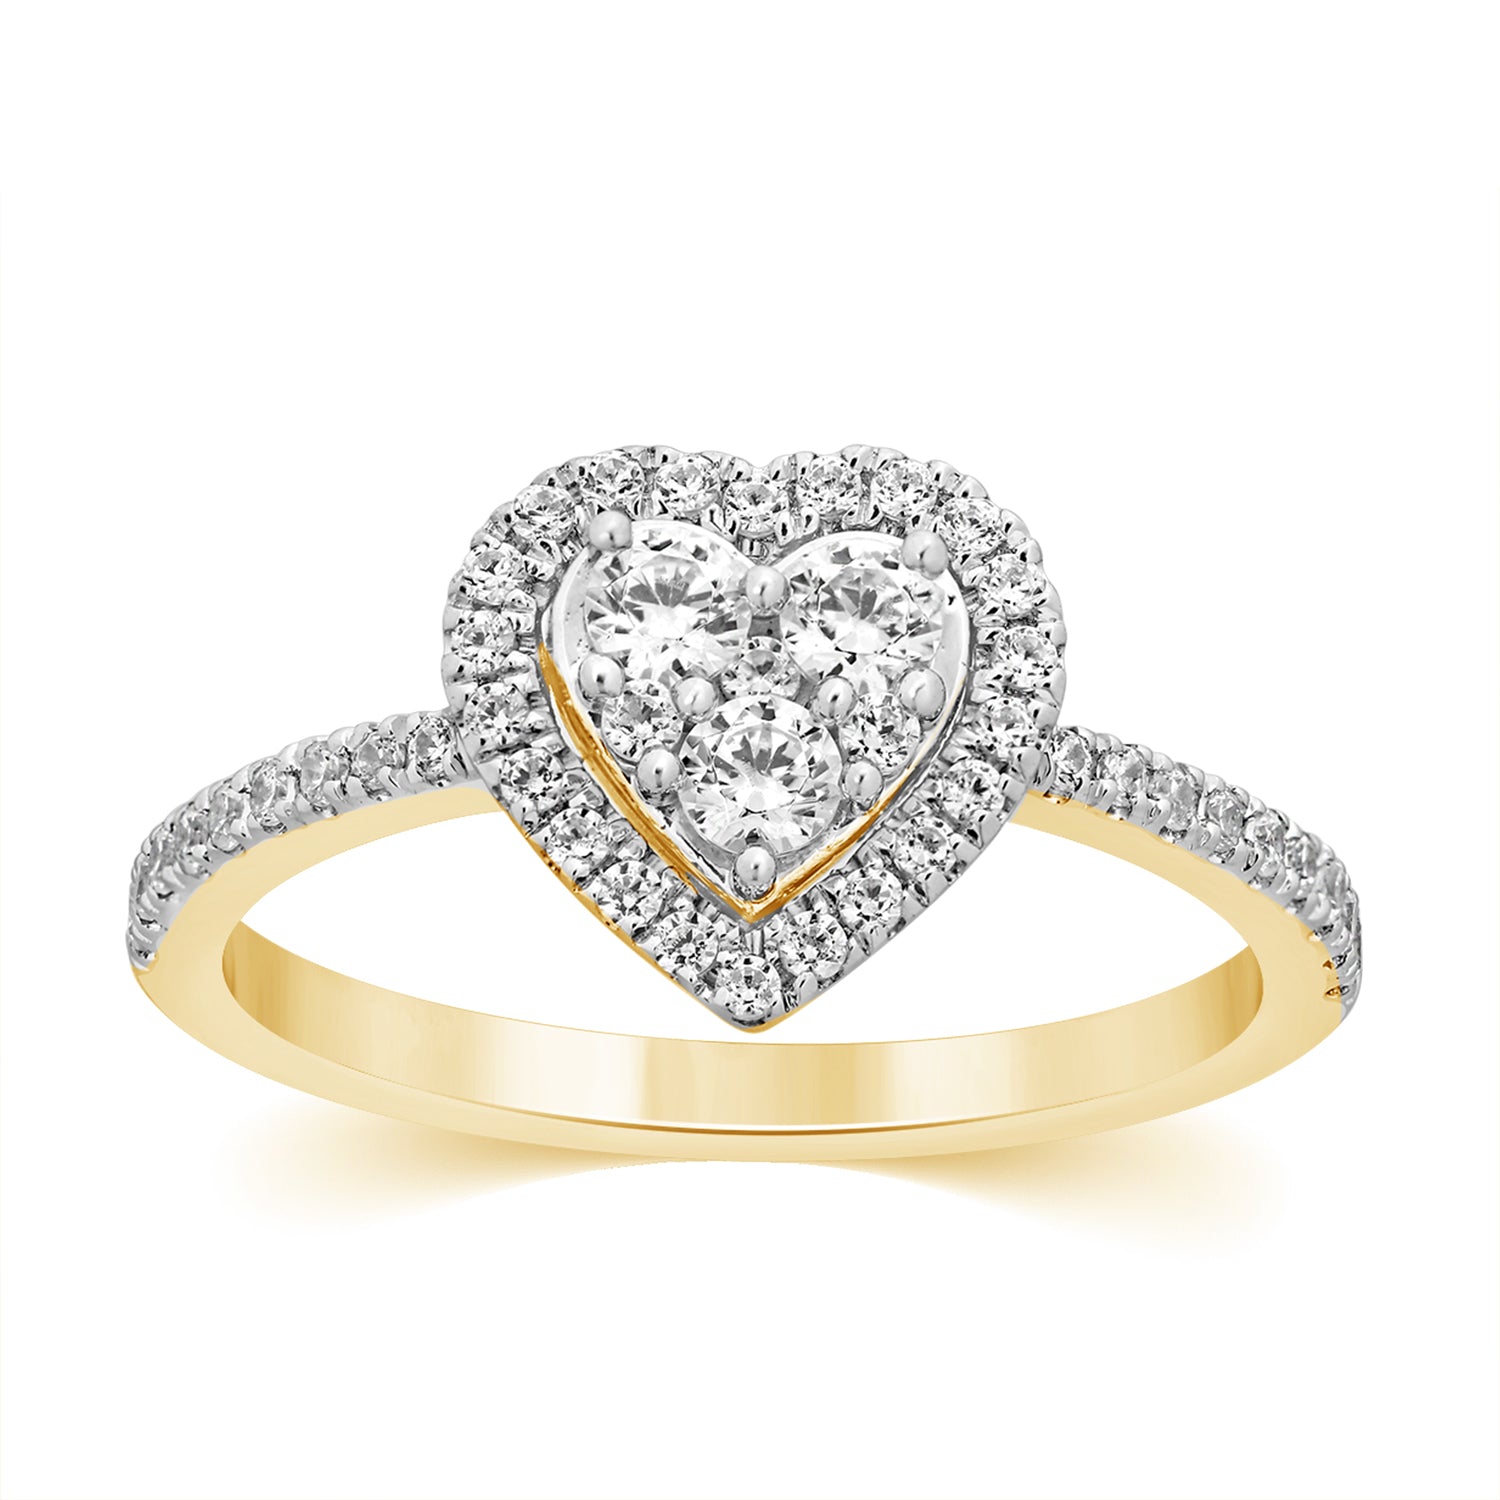 Heart Engagement Ring With 0.52 Carat TW Of Diamonds In 10K Yellow Gold